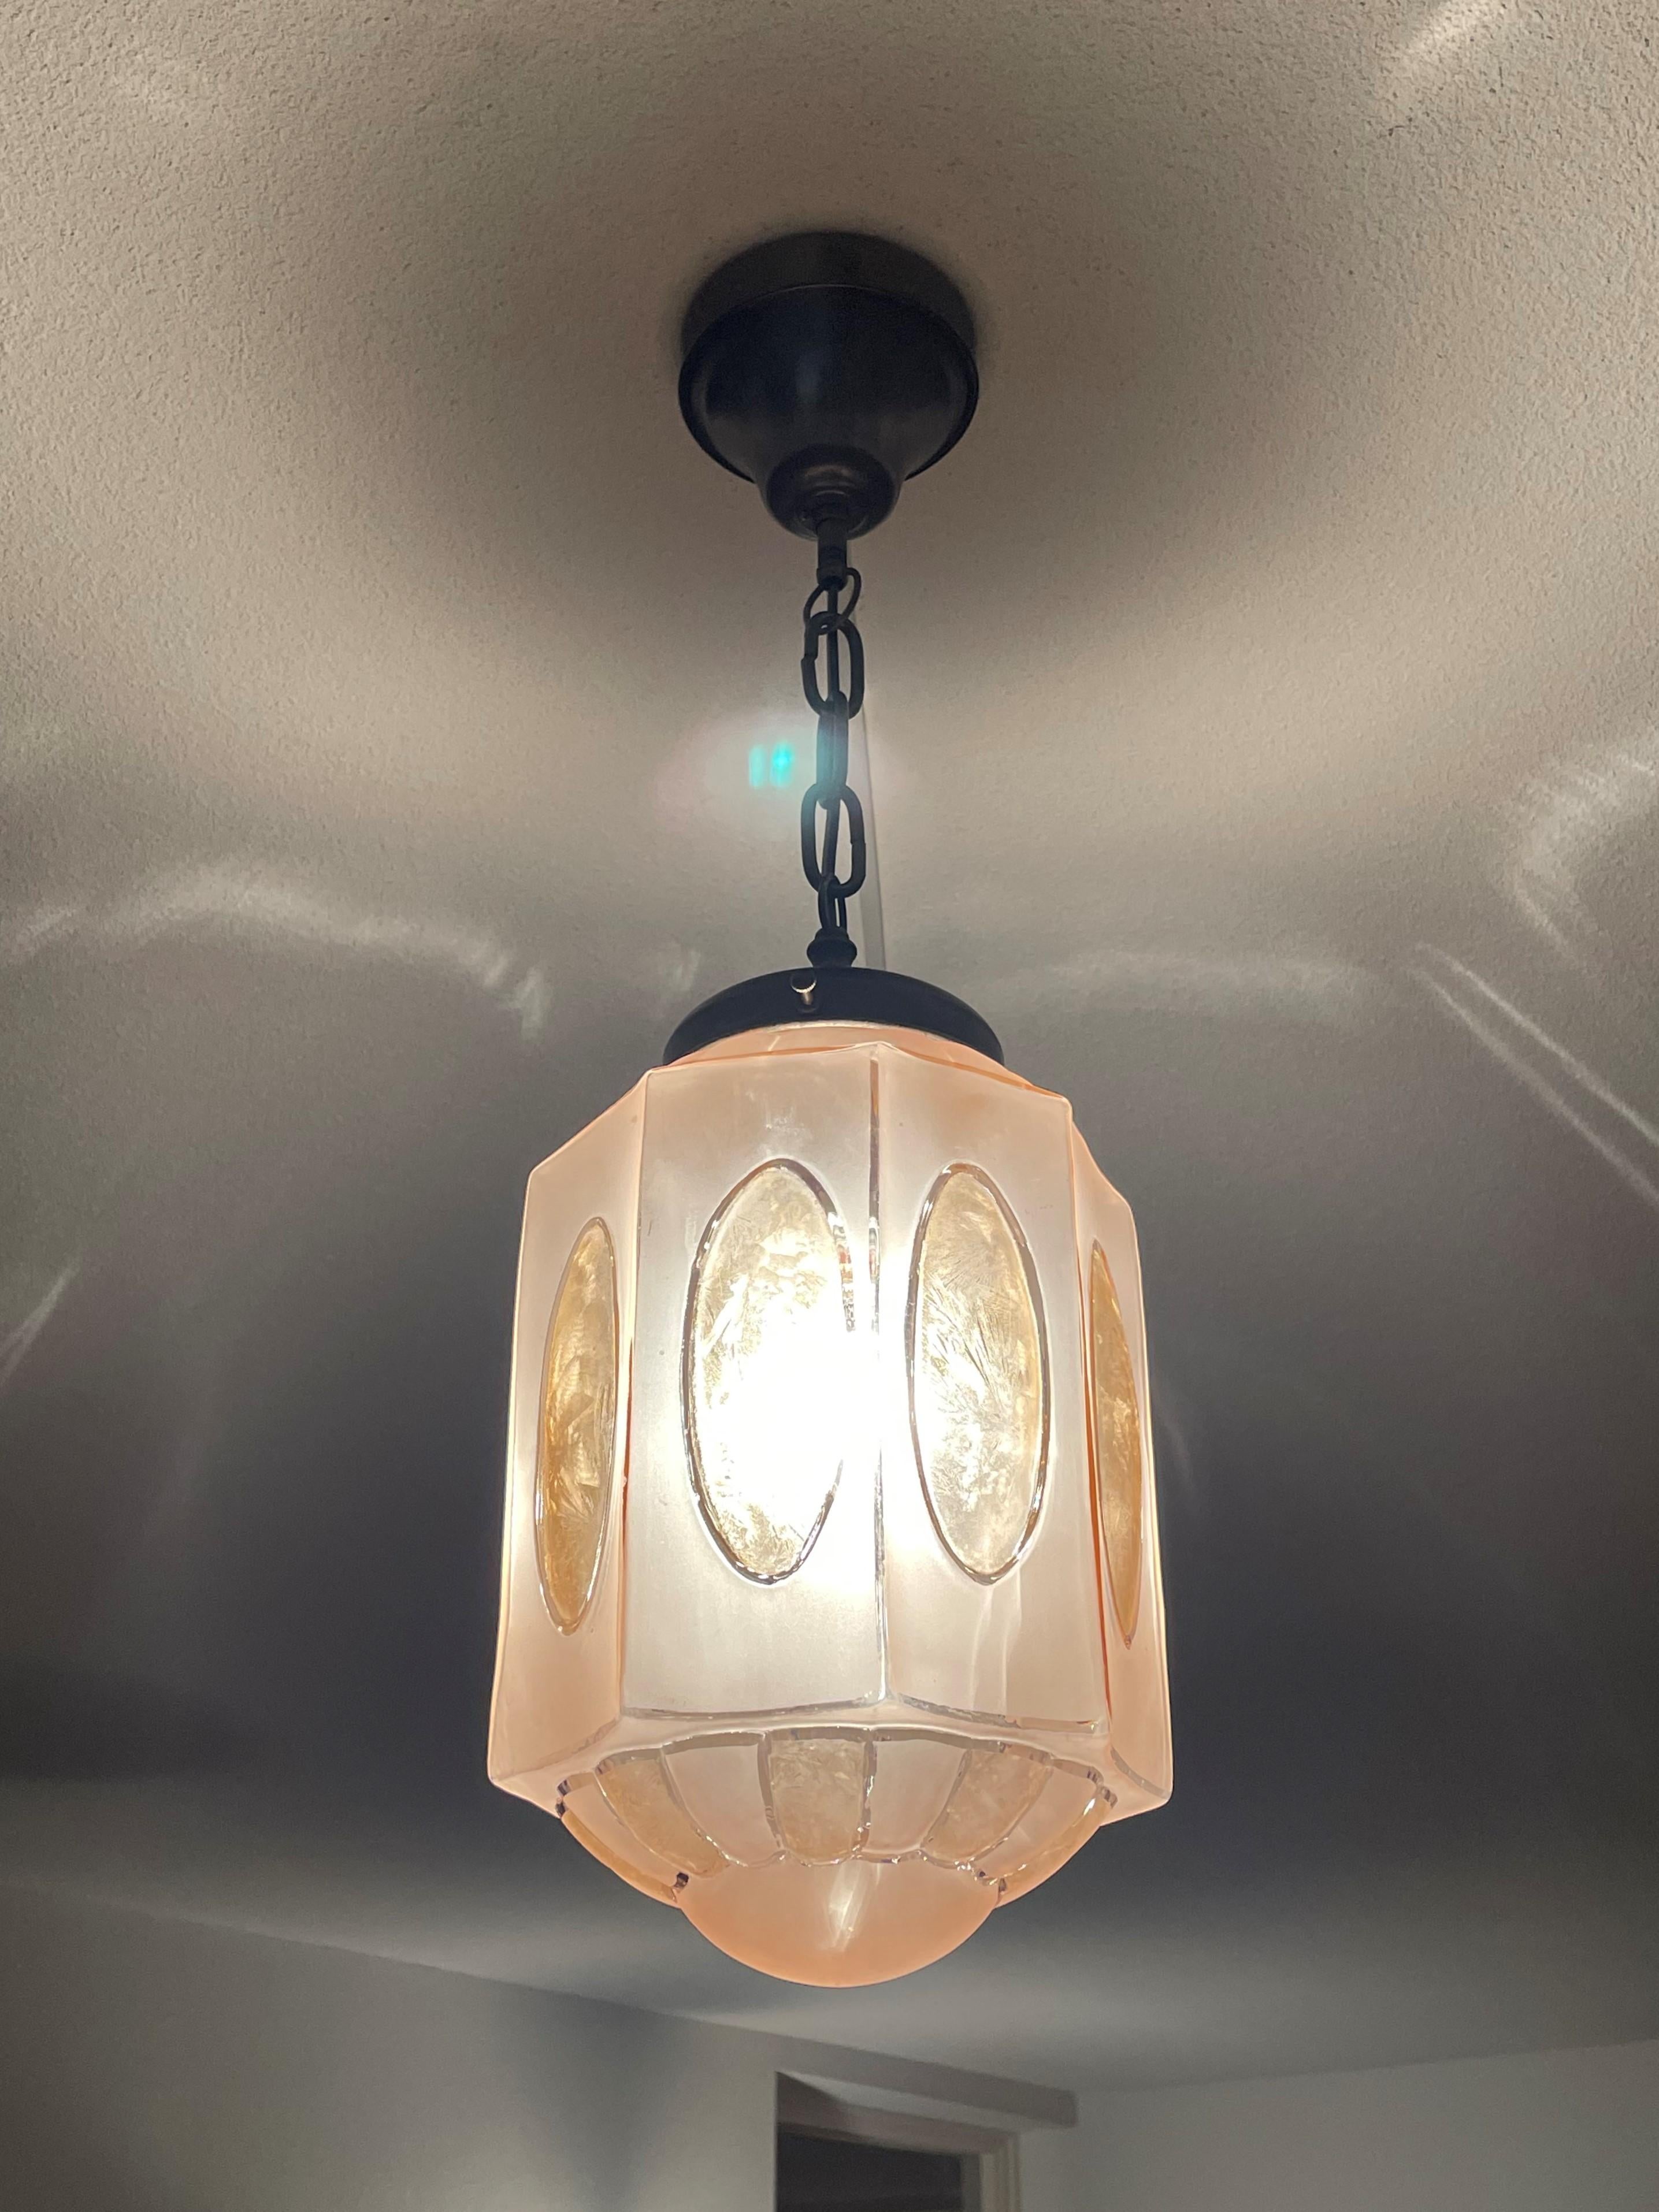 Rare and beautiful Art Glass pendant from the heydays of the European Art Deco era.

In our view this rare Art Deco pendant with its wonderful color and geometrically rounded design could be the perfect light fixture for an entrance, a landing or